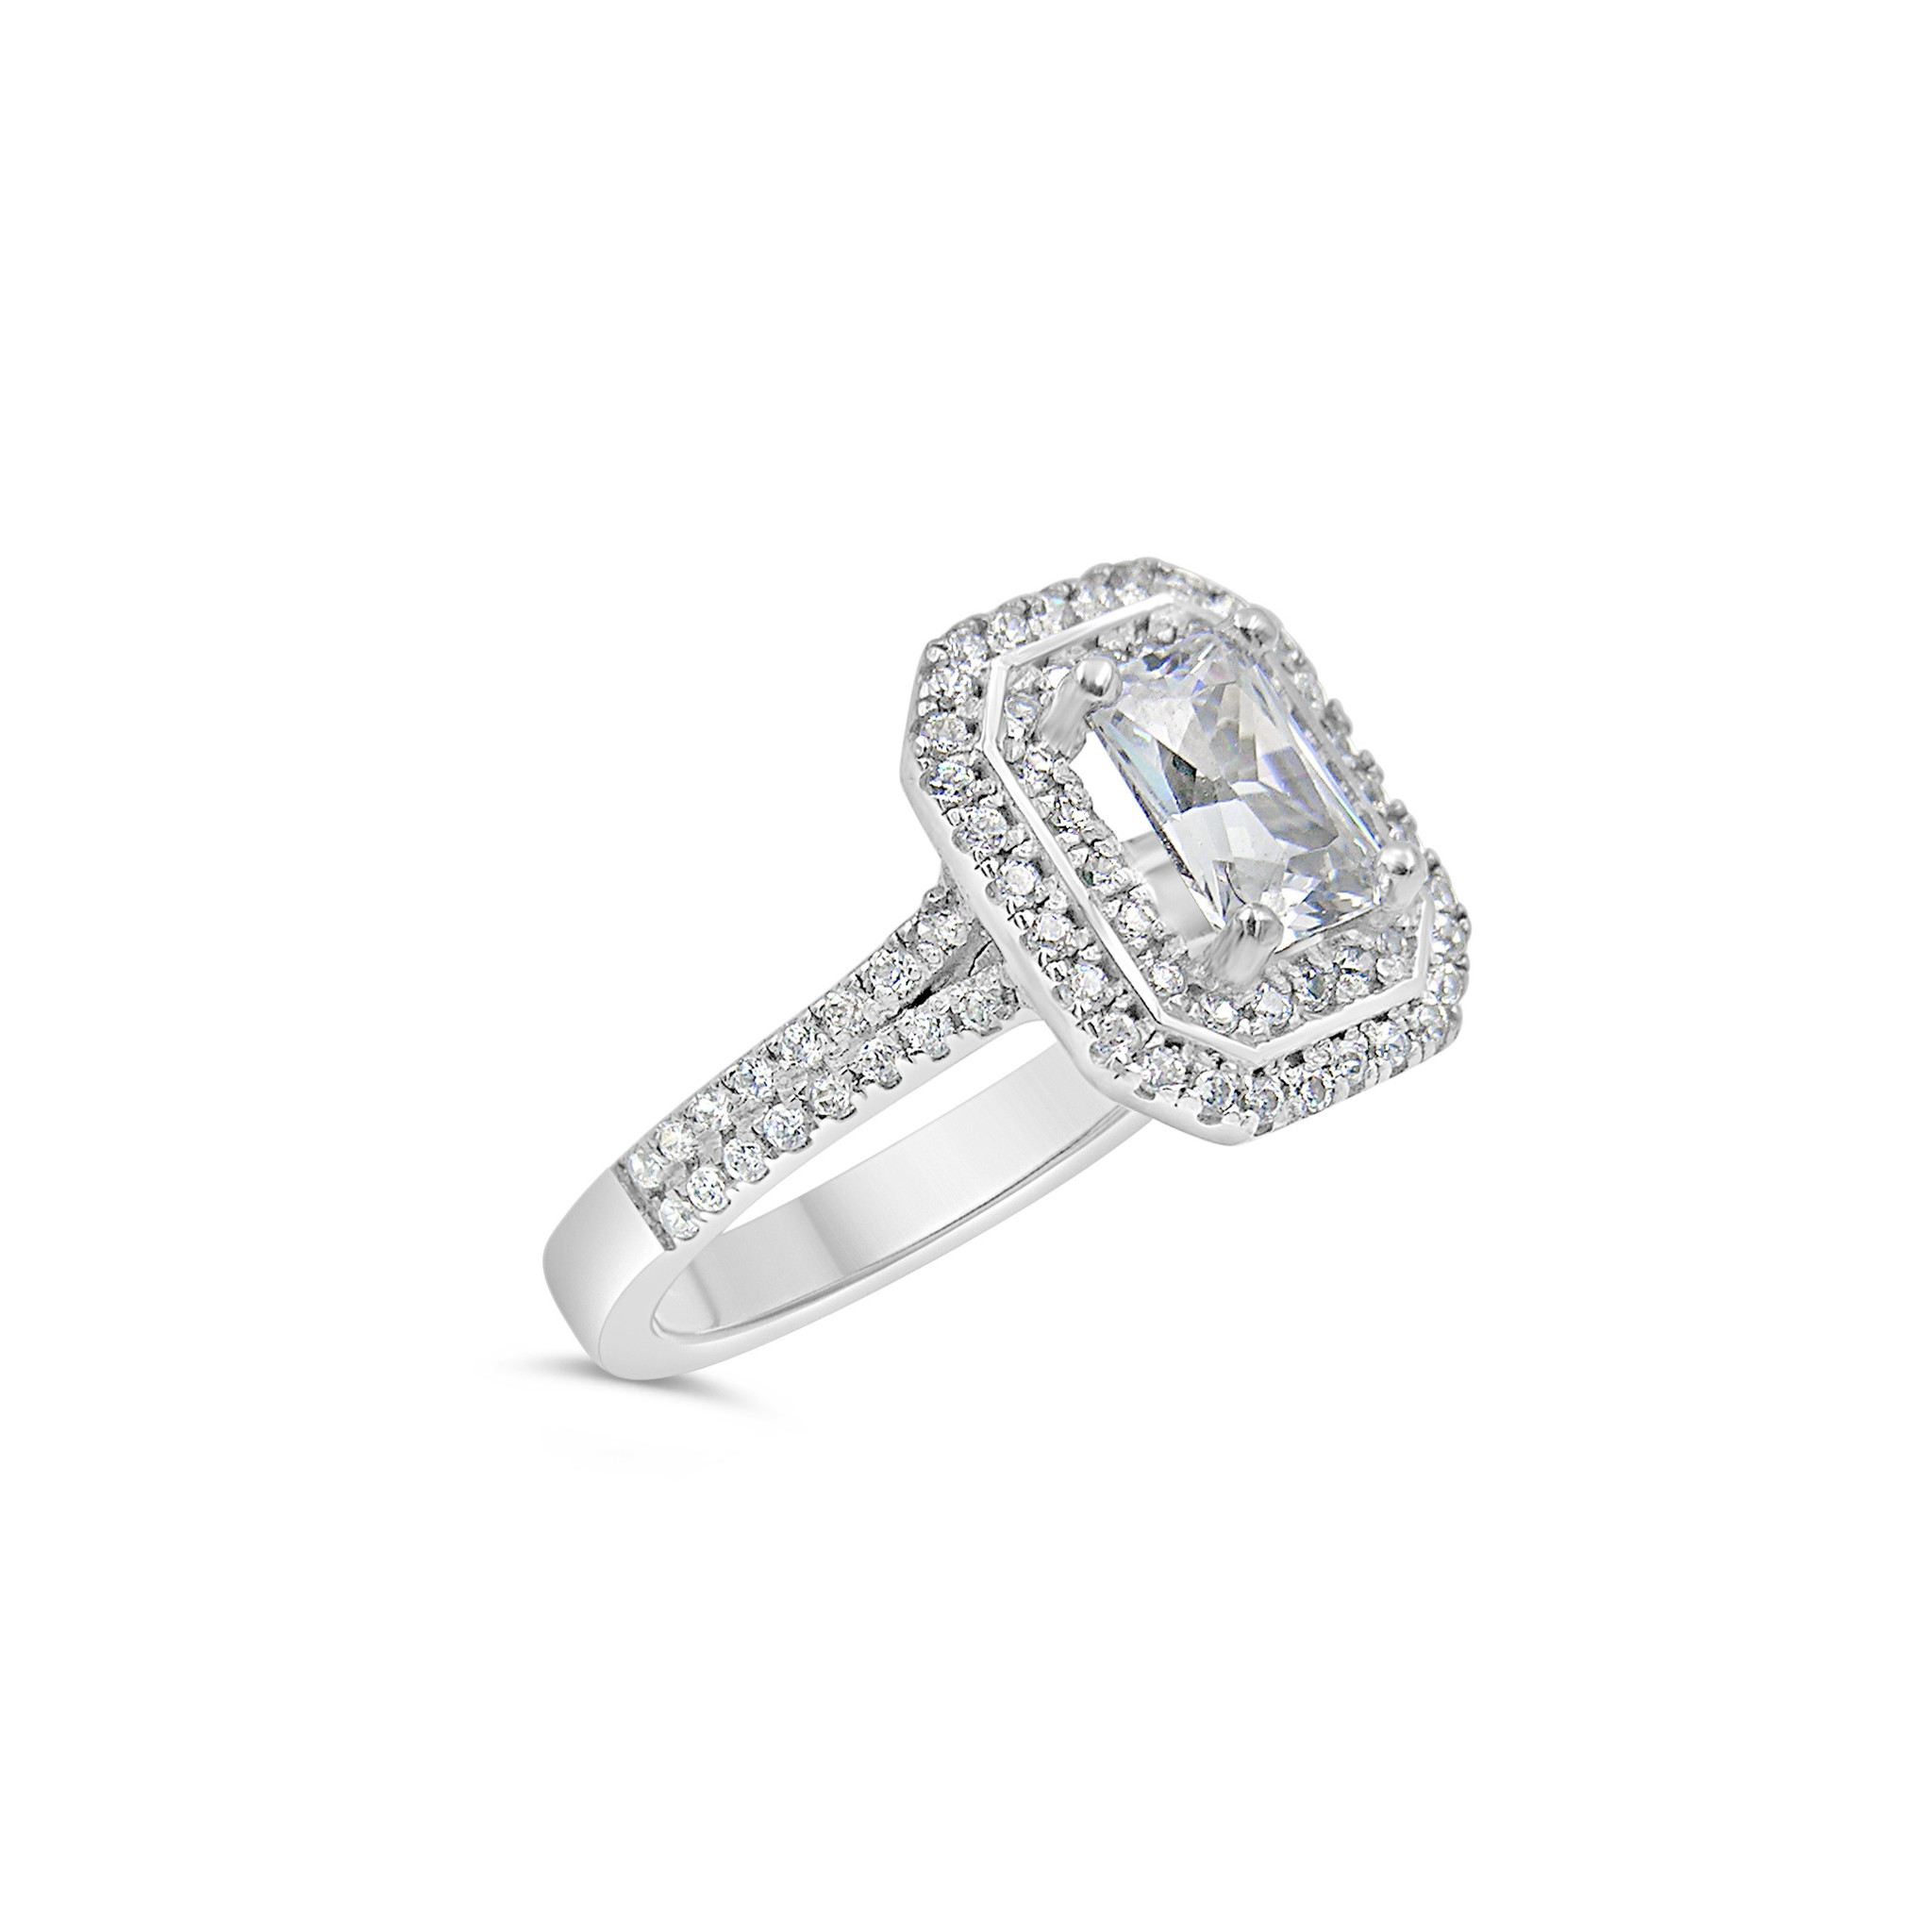 18kt white gold engagement ring with zirconia